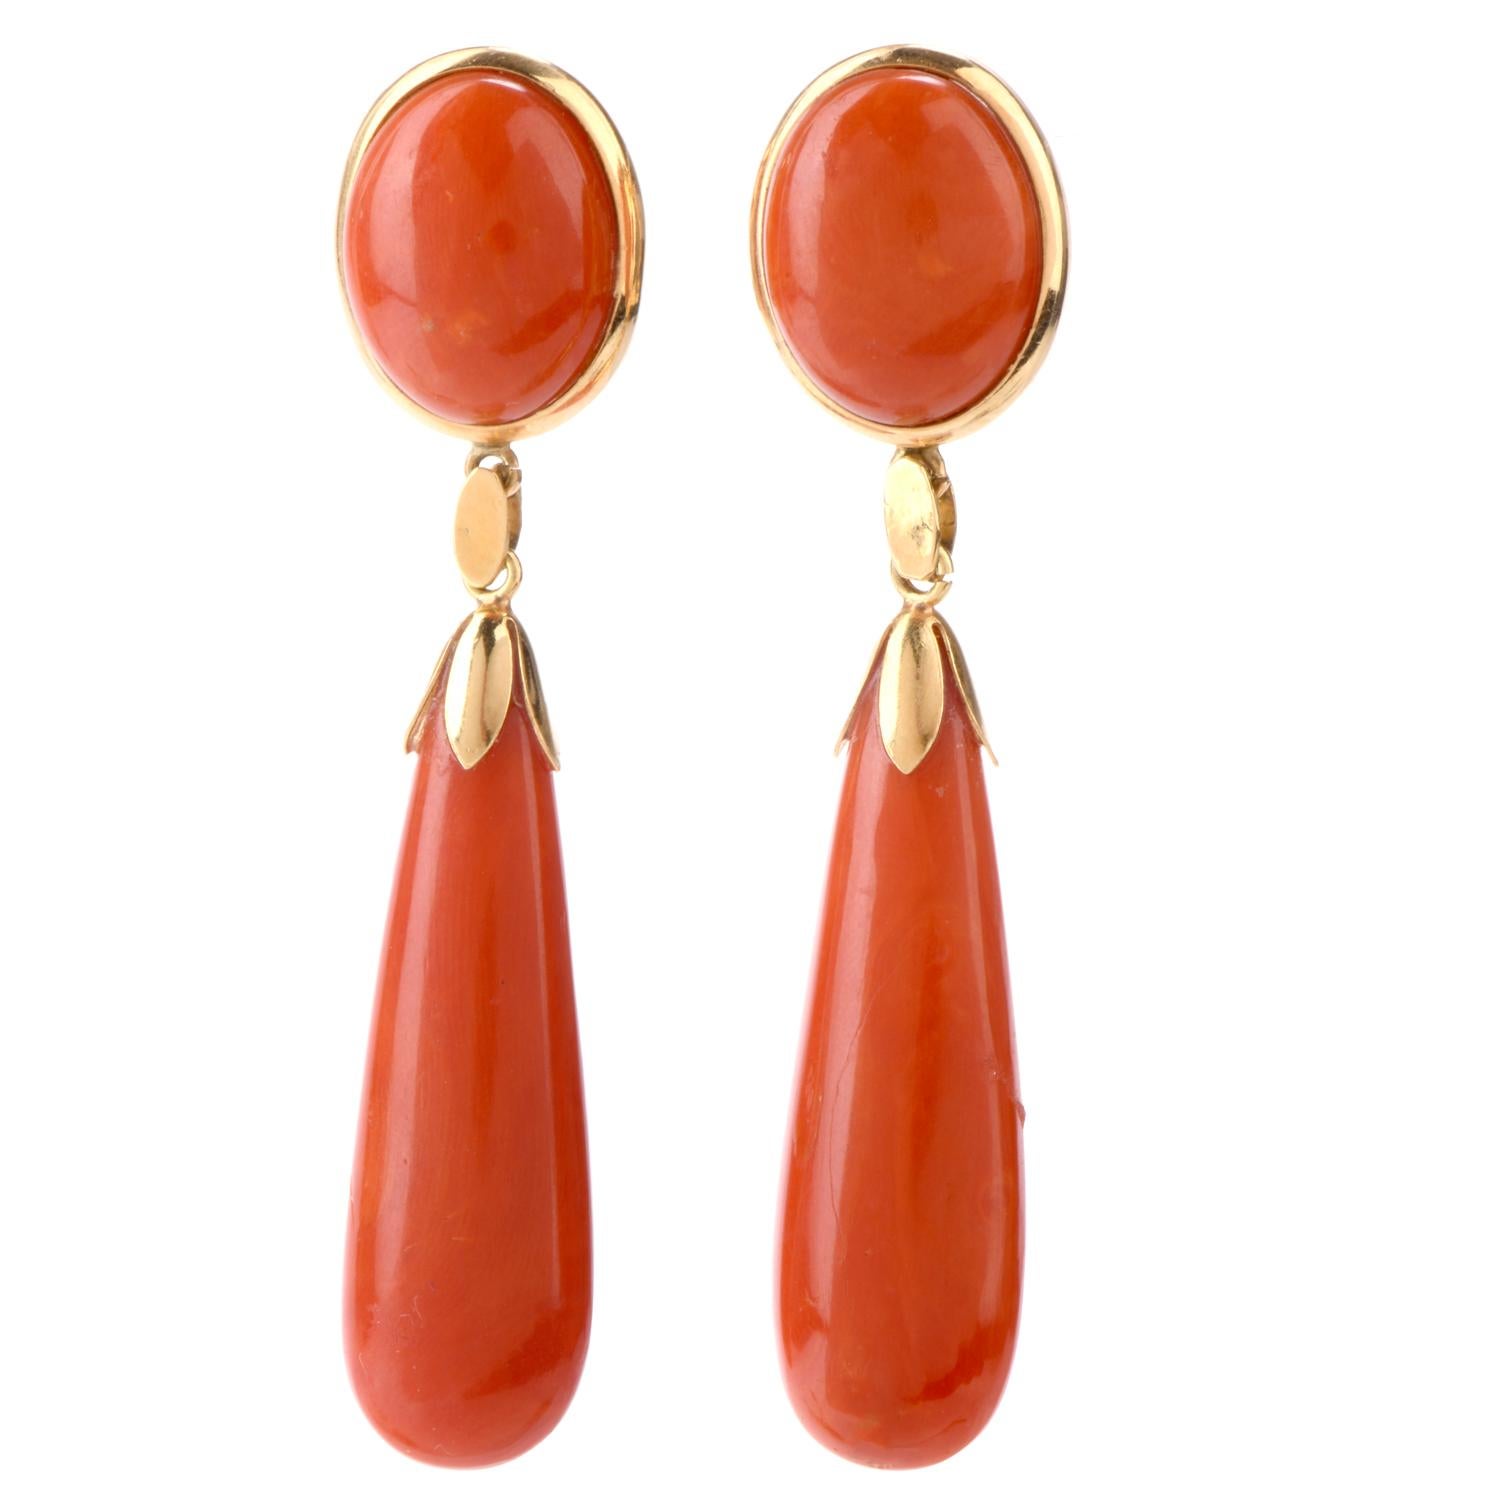 This Natural  Elegance comes in many different forms! This stunning  antique set features a button of Natural Red Coral against the ear and very elongated Teardrops dangling freely with floral caps of 18K yellow gold. 

Coral measures 13.06 x